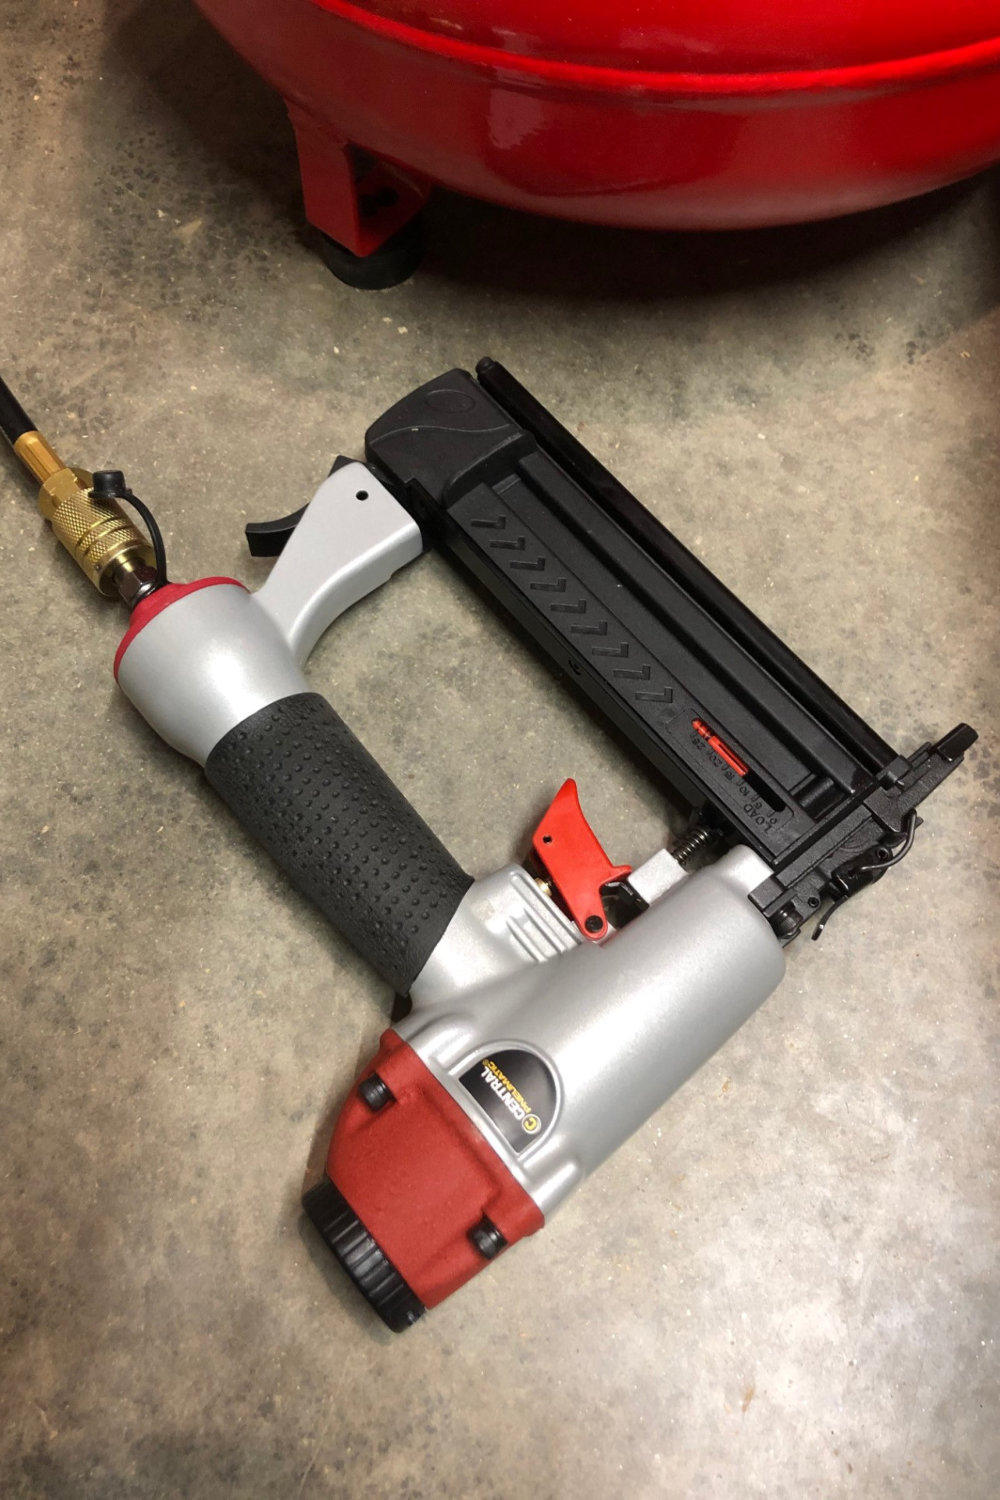 Product Review: The Central Pneumatic 2-in-1 Air Nailer/Stapler